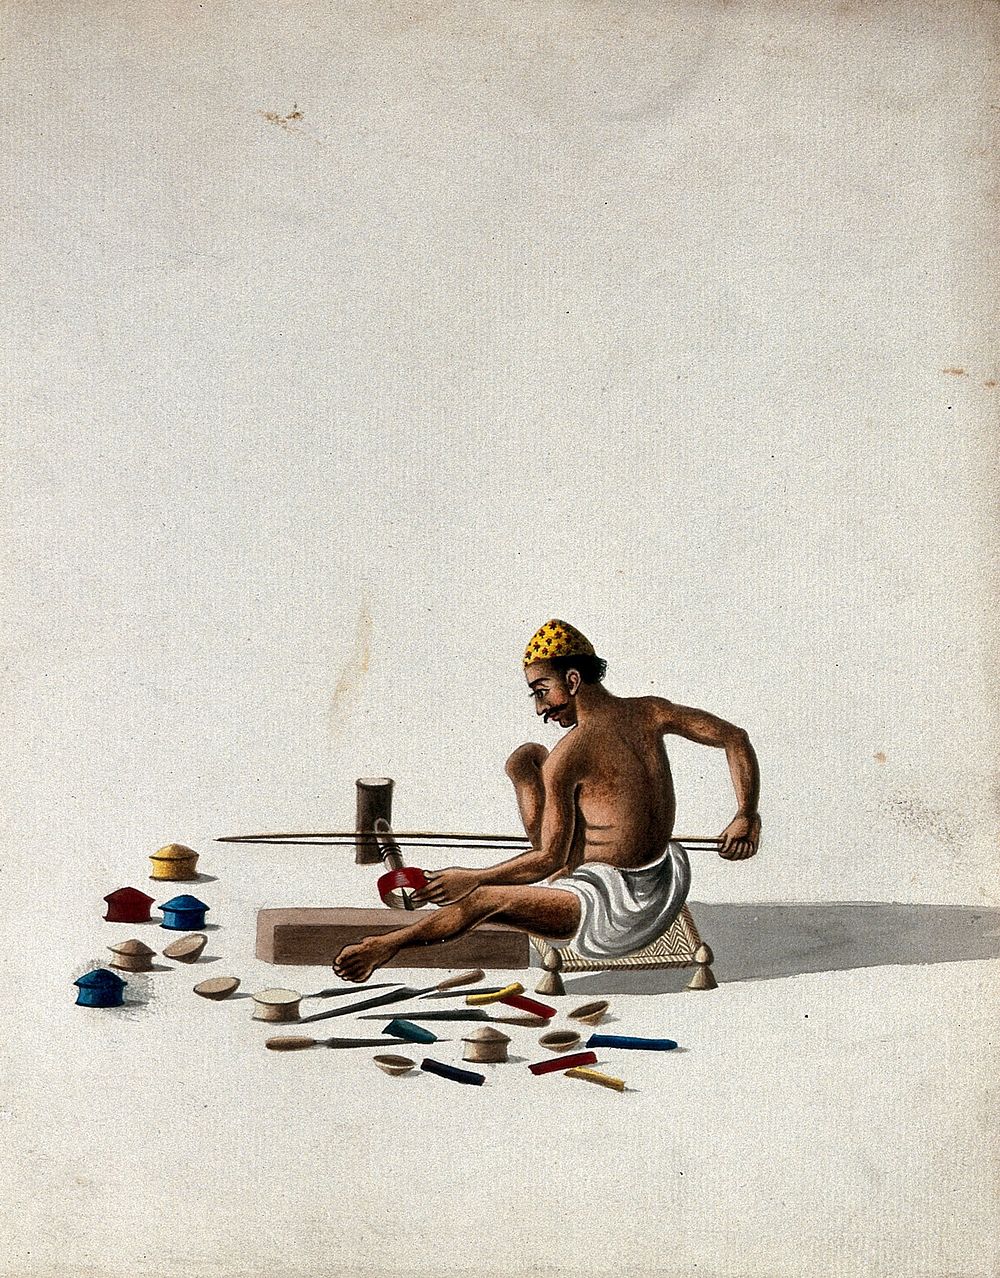 A man making small wooden objects (boxes). Gouache painting by an Indian artist.